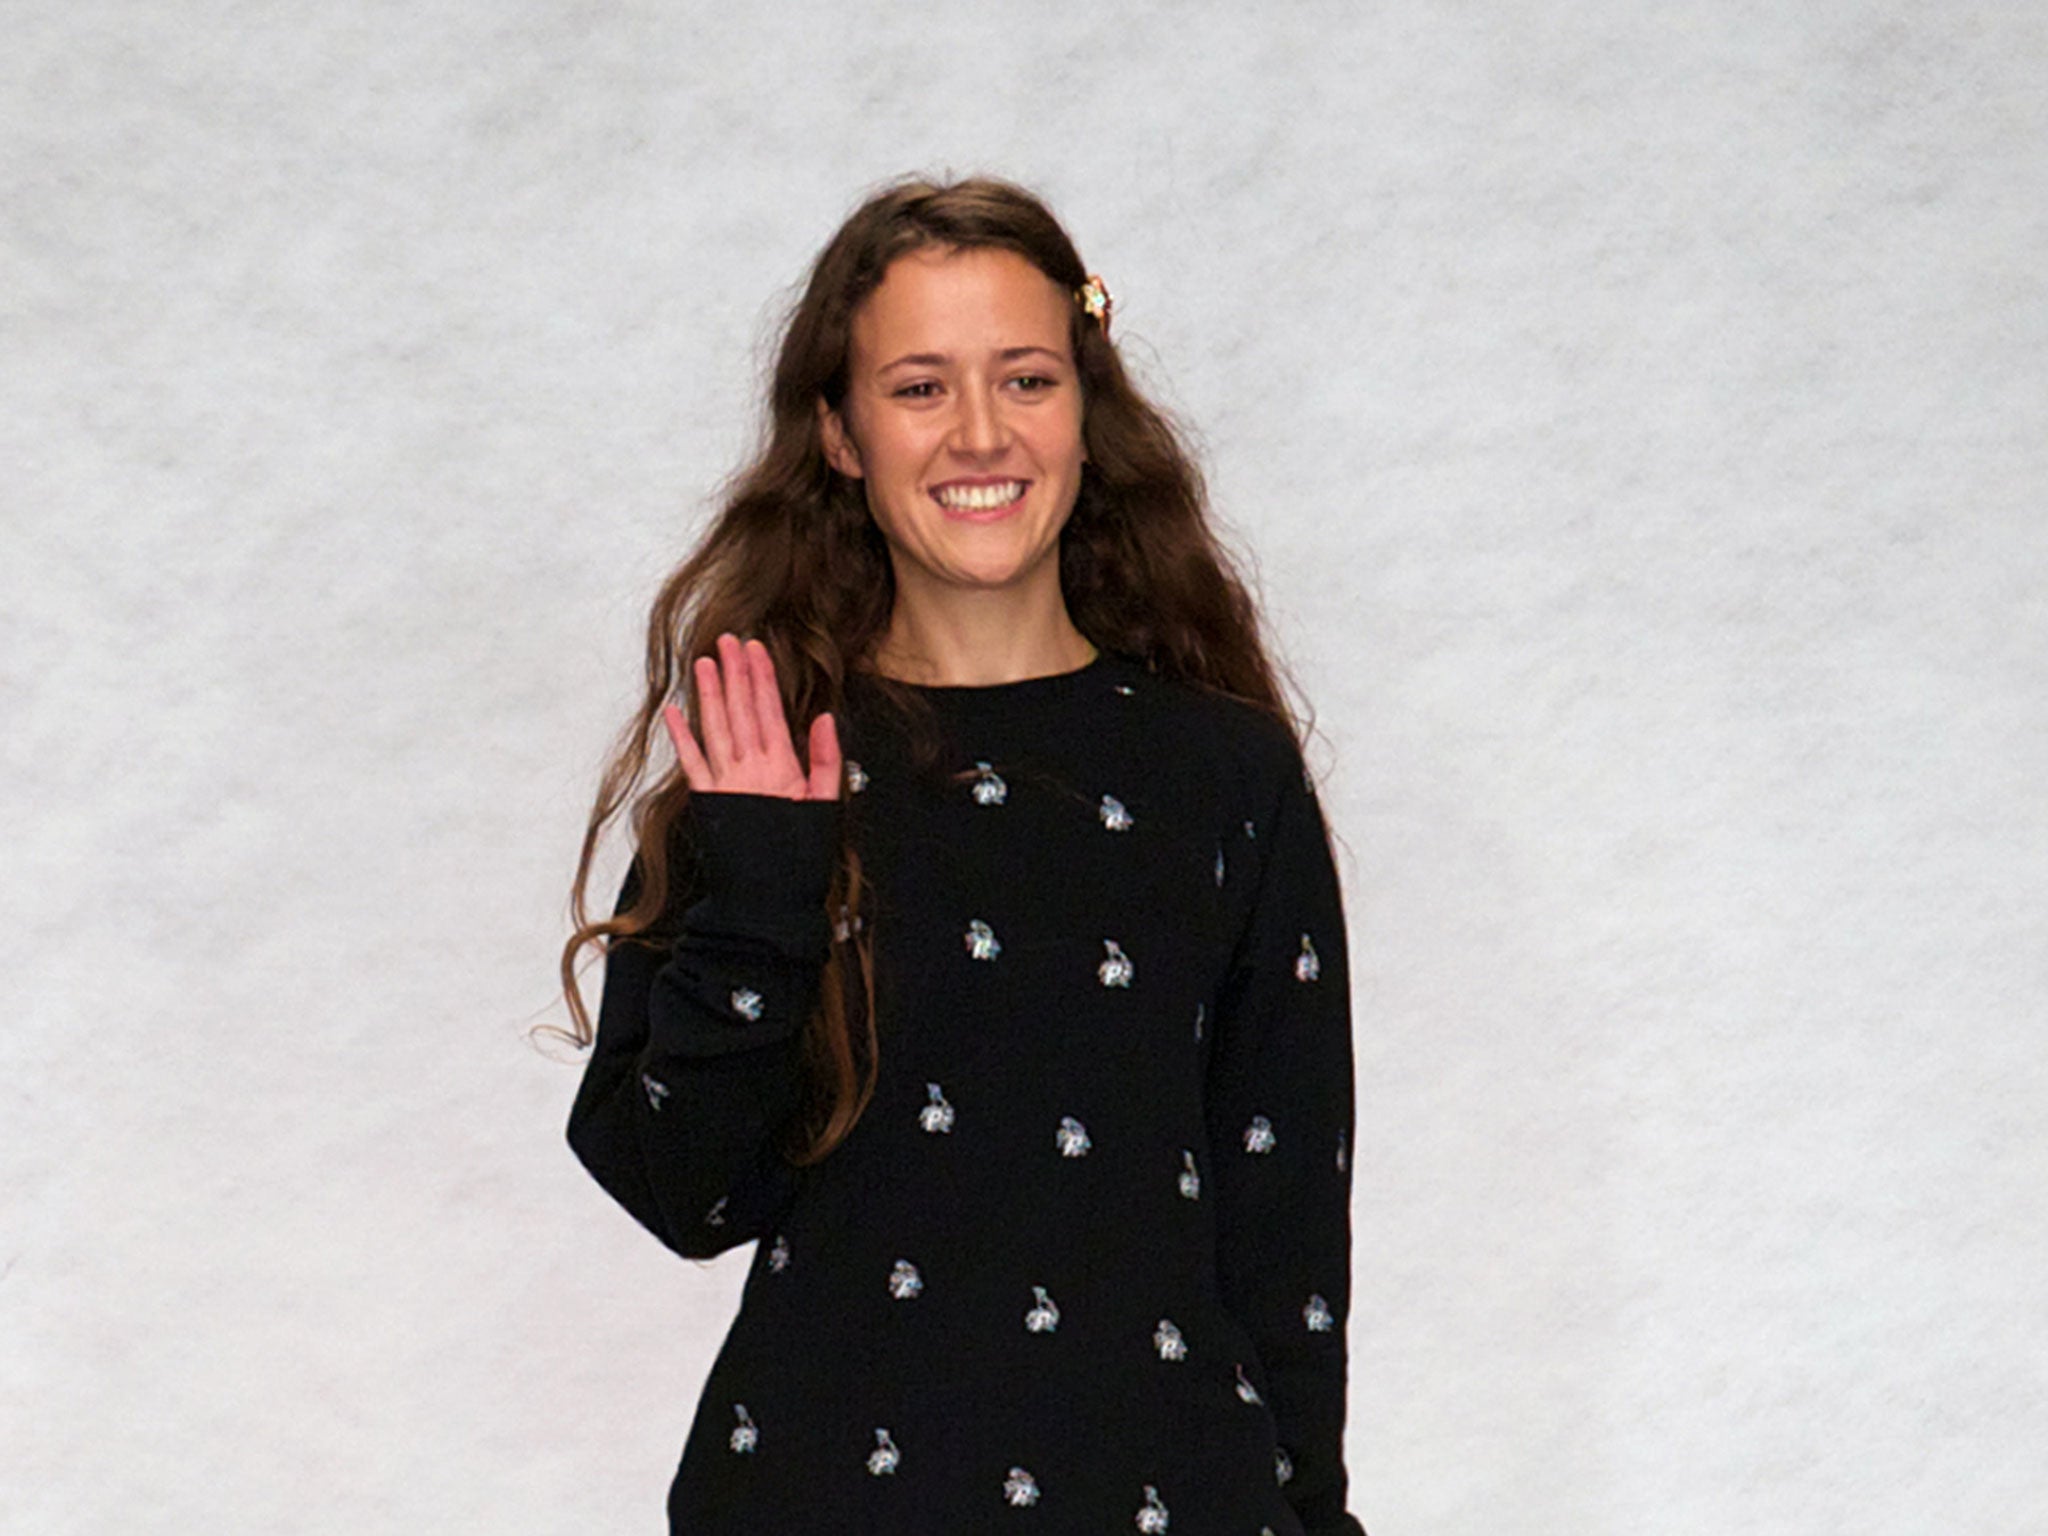 Ashley Williams greets the audience at the end of her 2014 spring/summer runway show during the London Fashion Week in London on 17 September, 2013